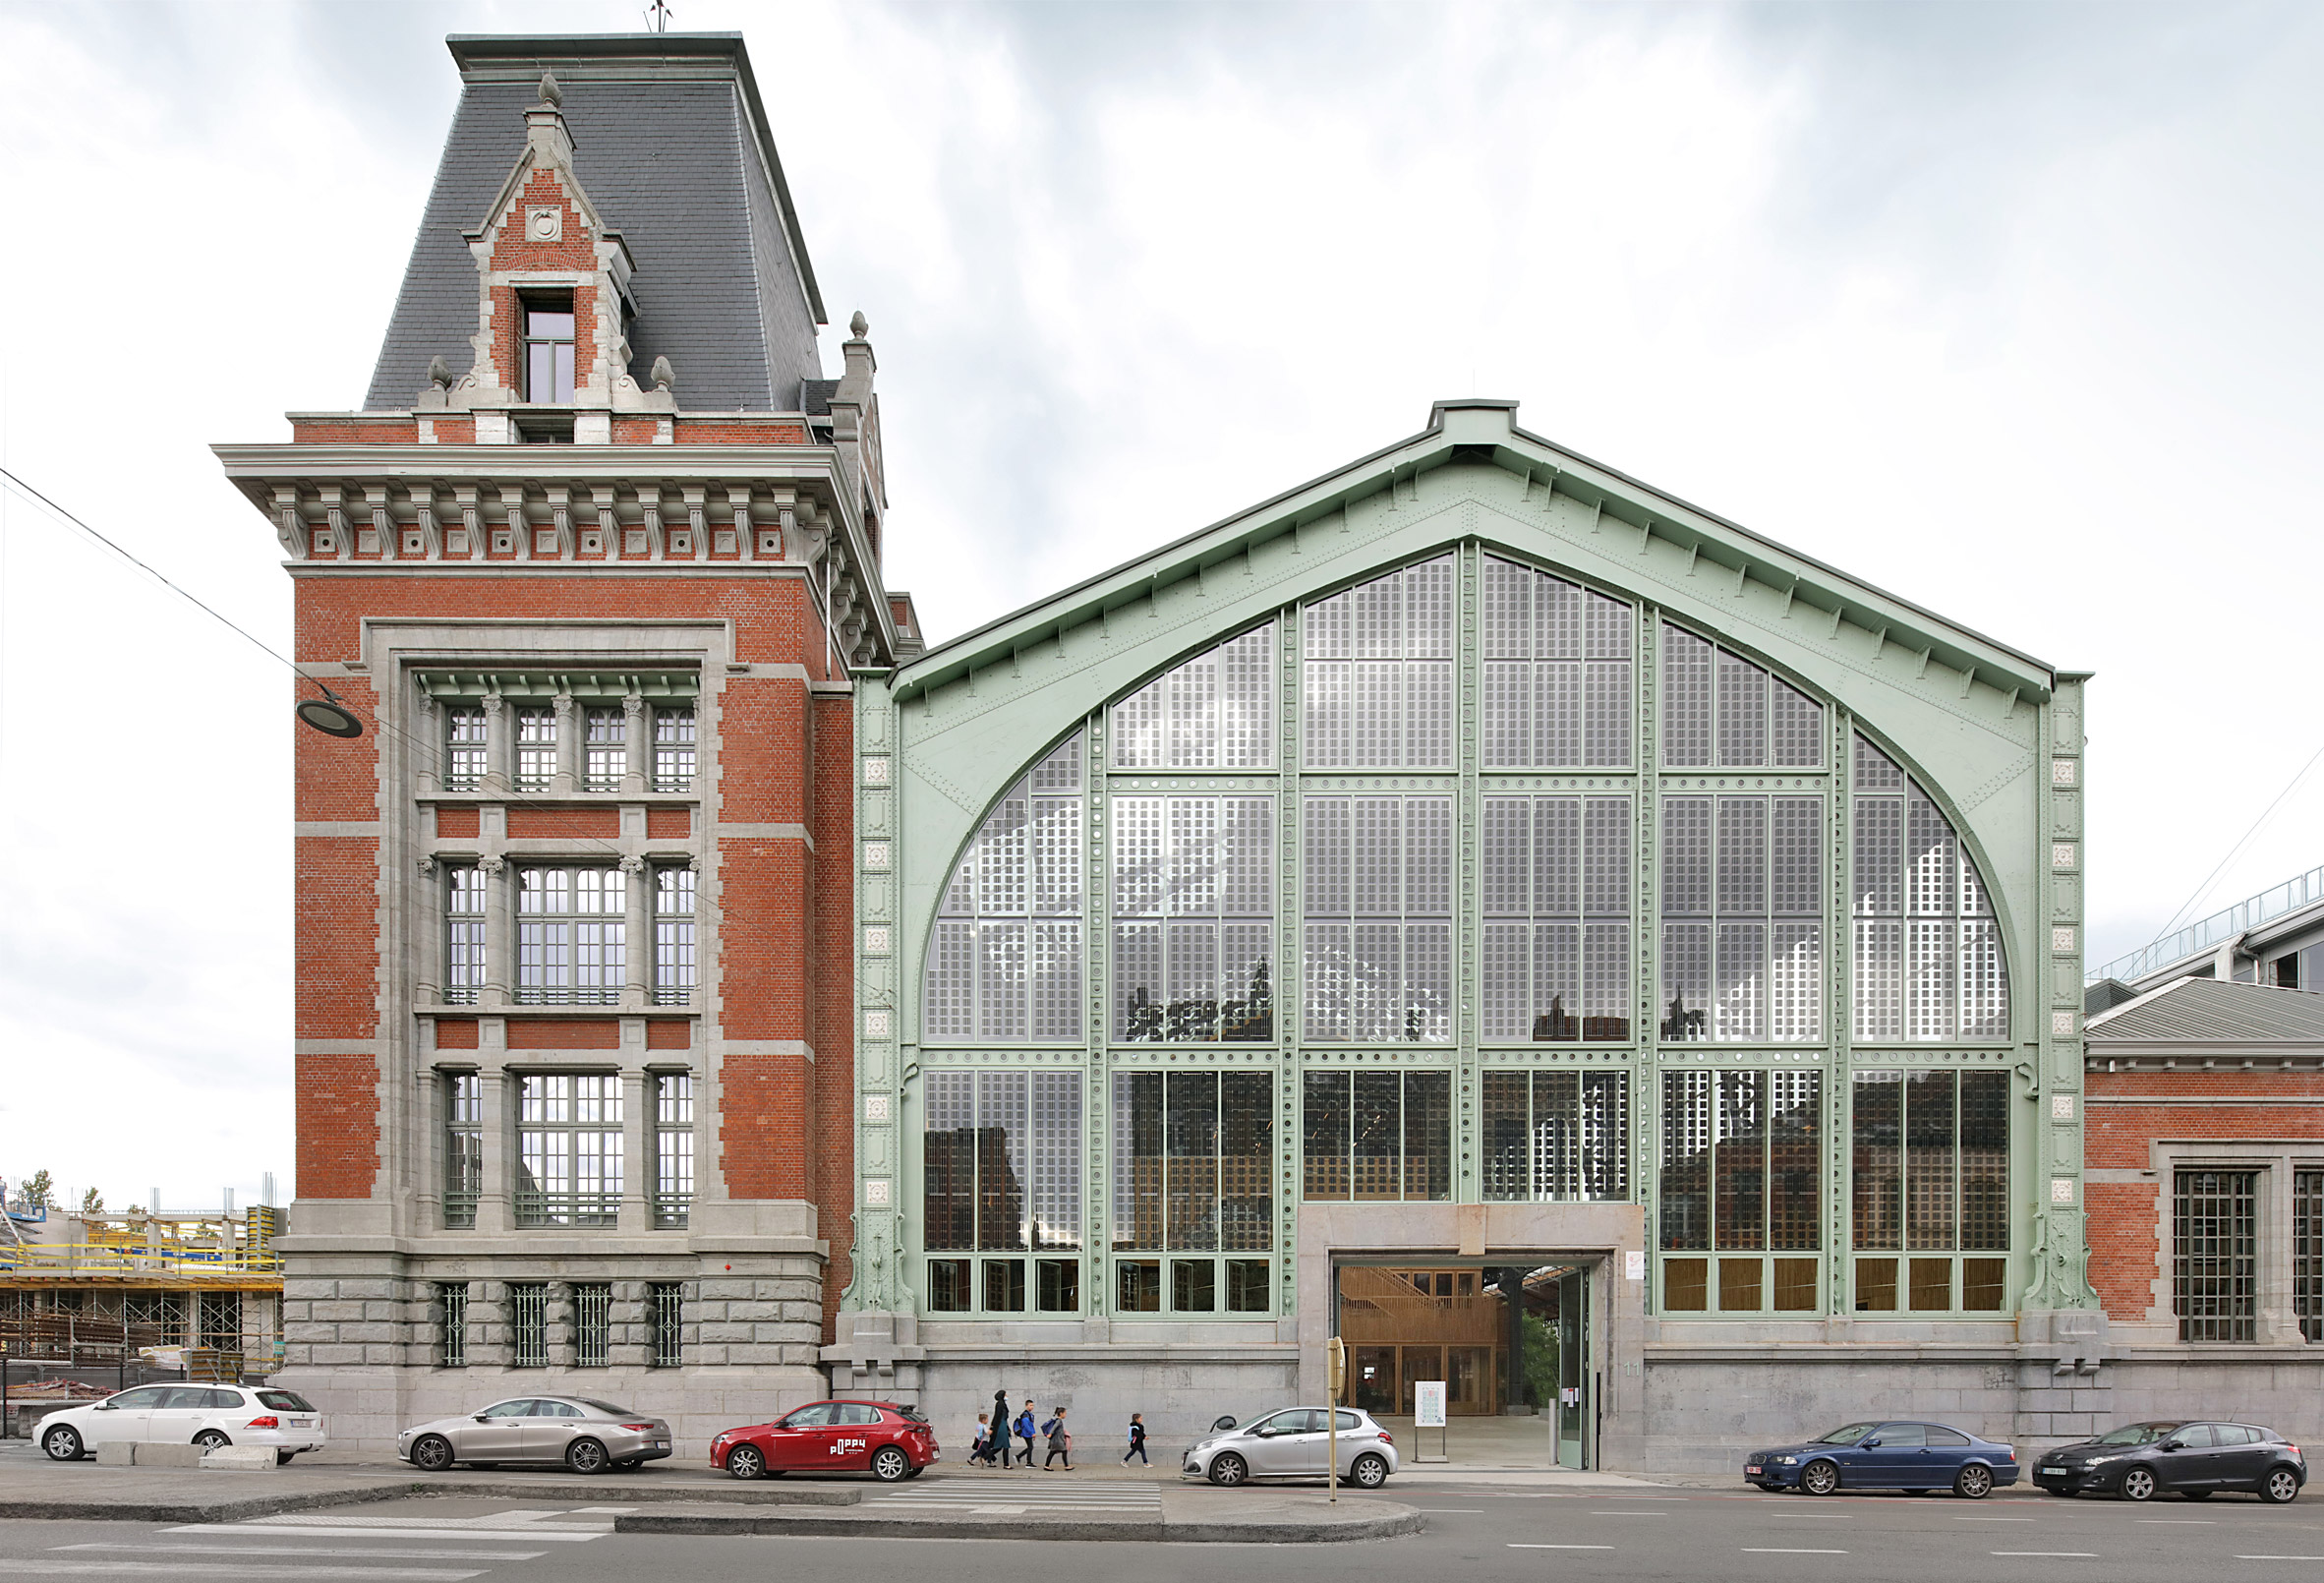 Gare Maritime CLT conversion by Neutelings Riedijk Architects in Brusselsa